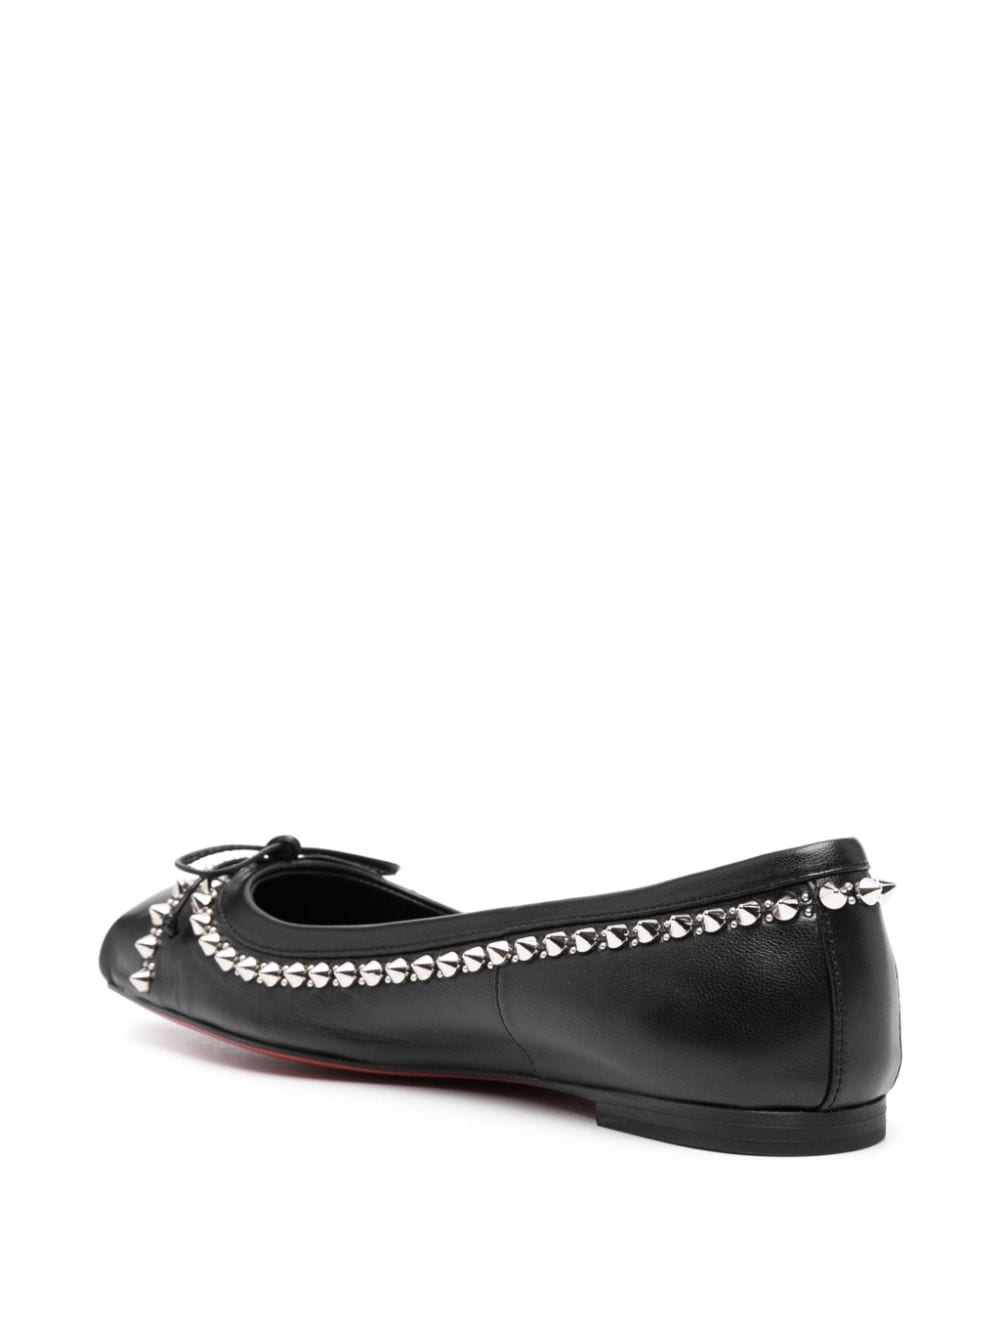 CHRISTIAN LOUBOUTIN Black Leather Spike Sandals for Women